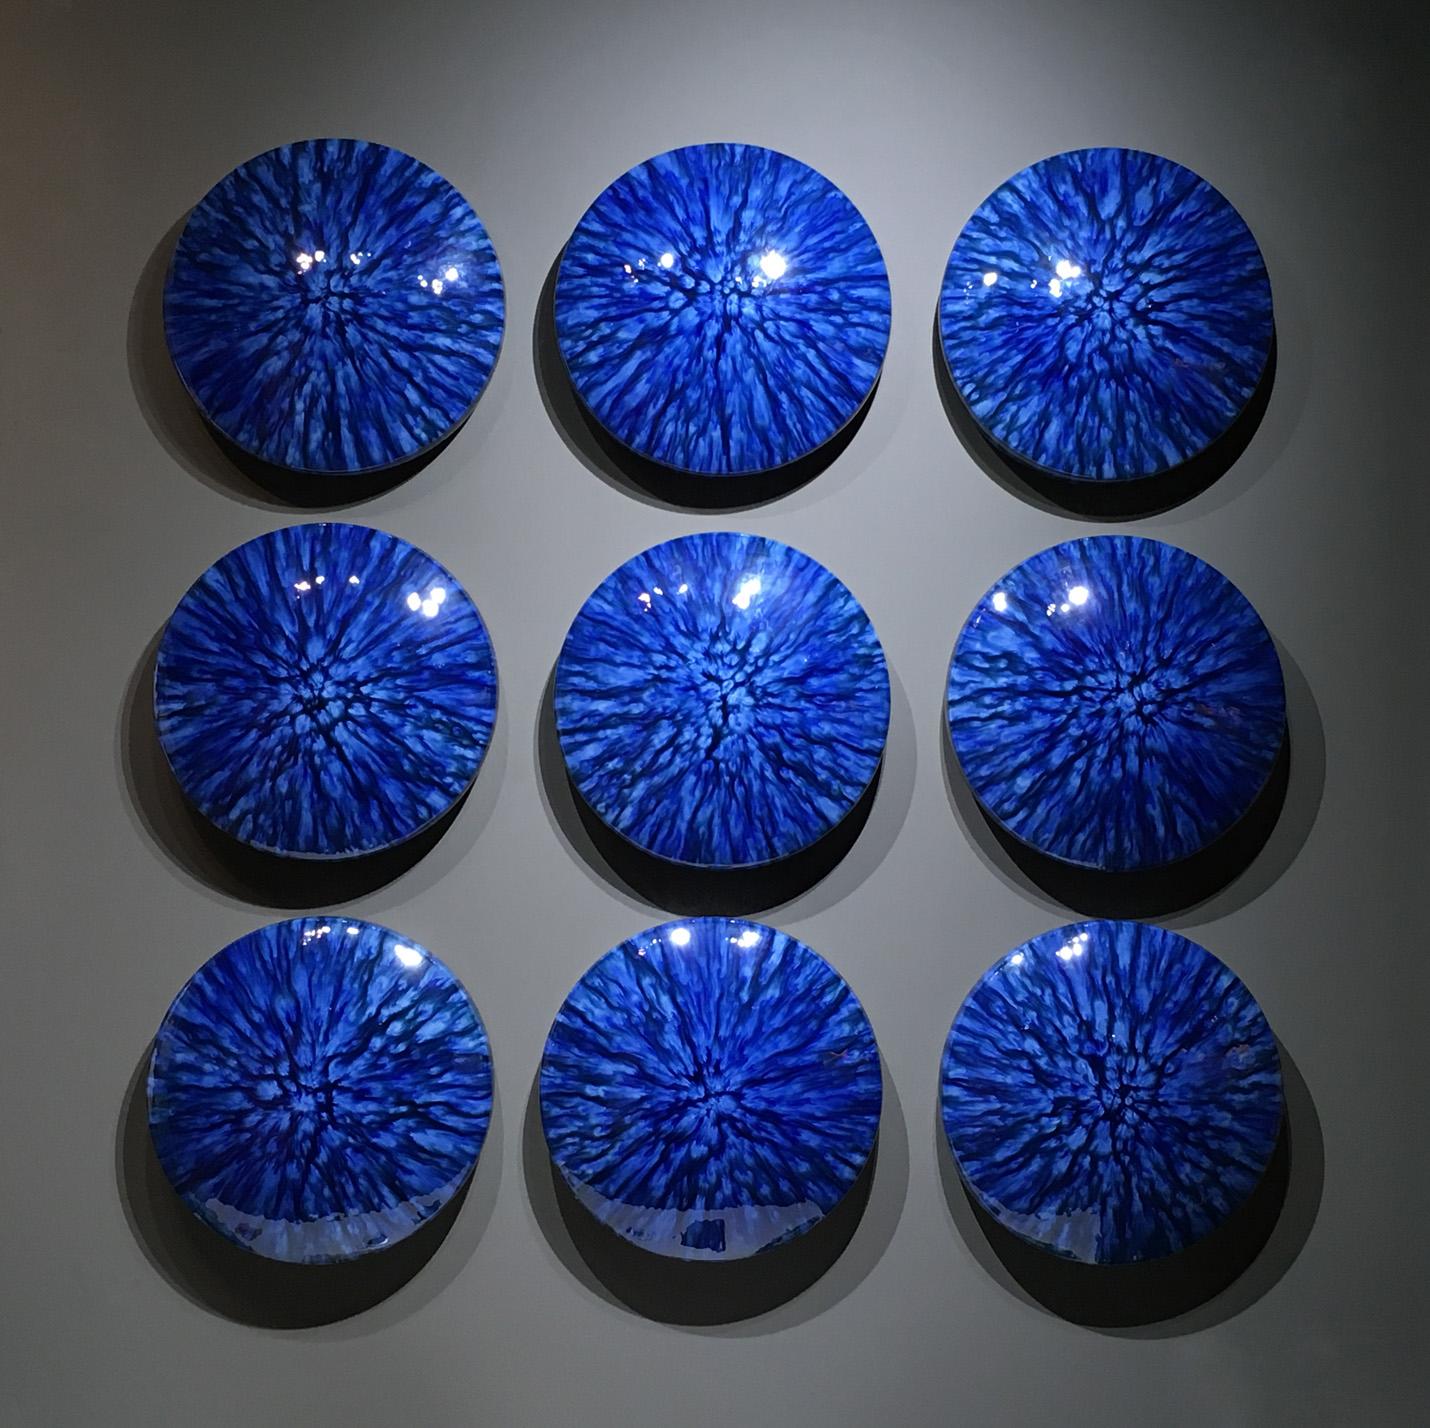 Glazed Limpid Pools - Ceramic wall sculpture by William Edwards For Sale